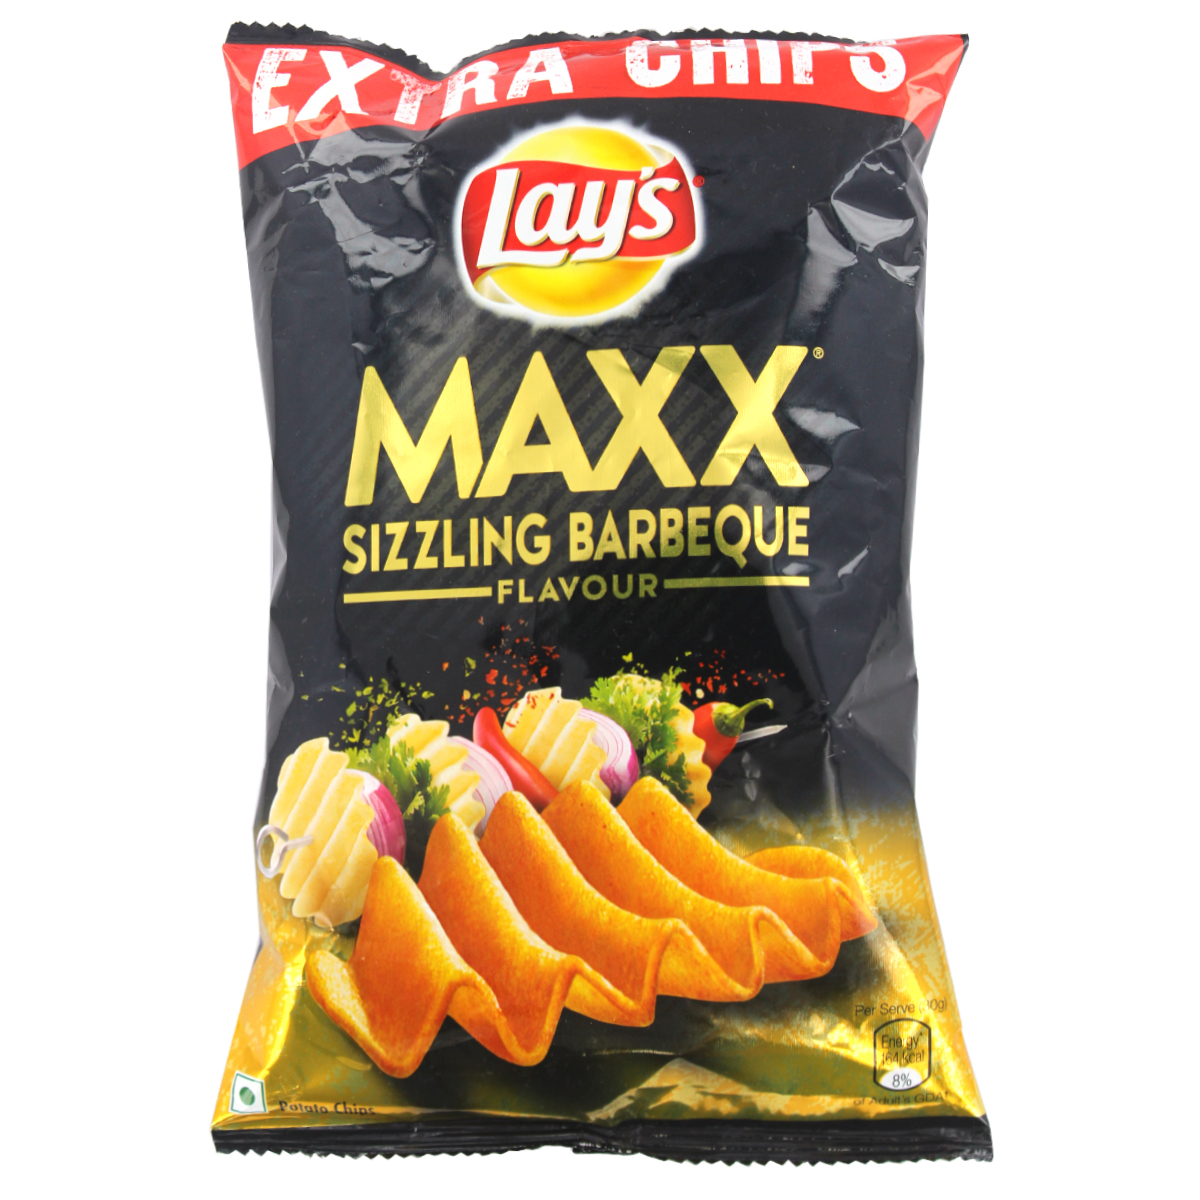 Lays Maxx Sizzling Barbeque 56gm